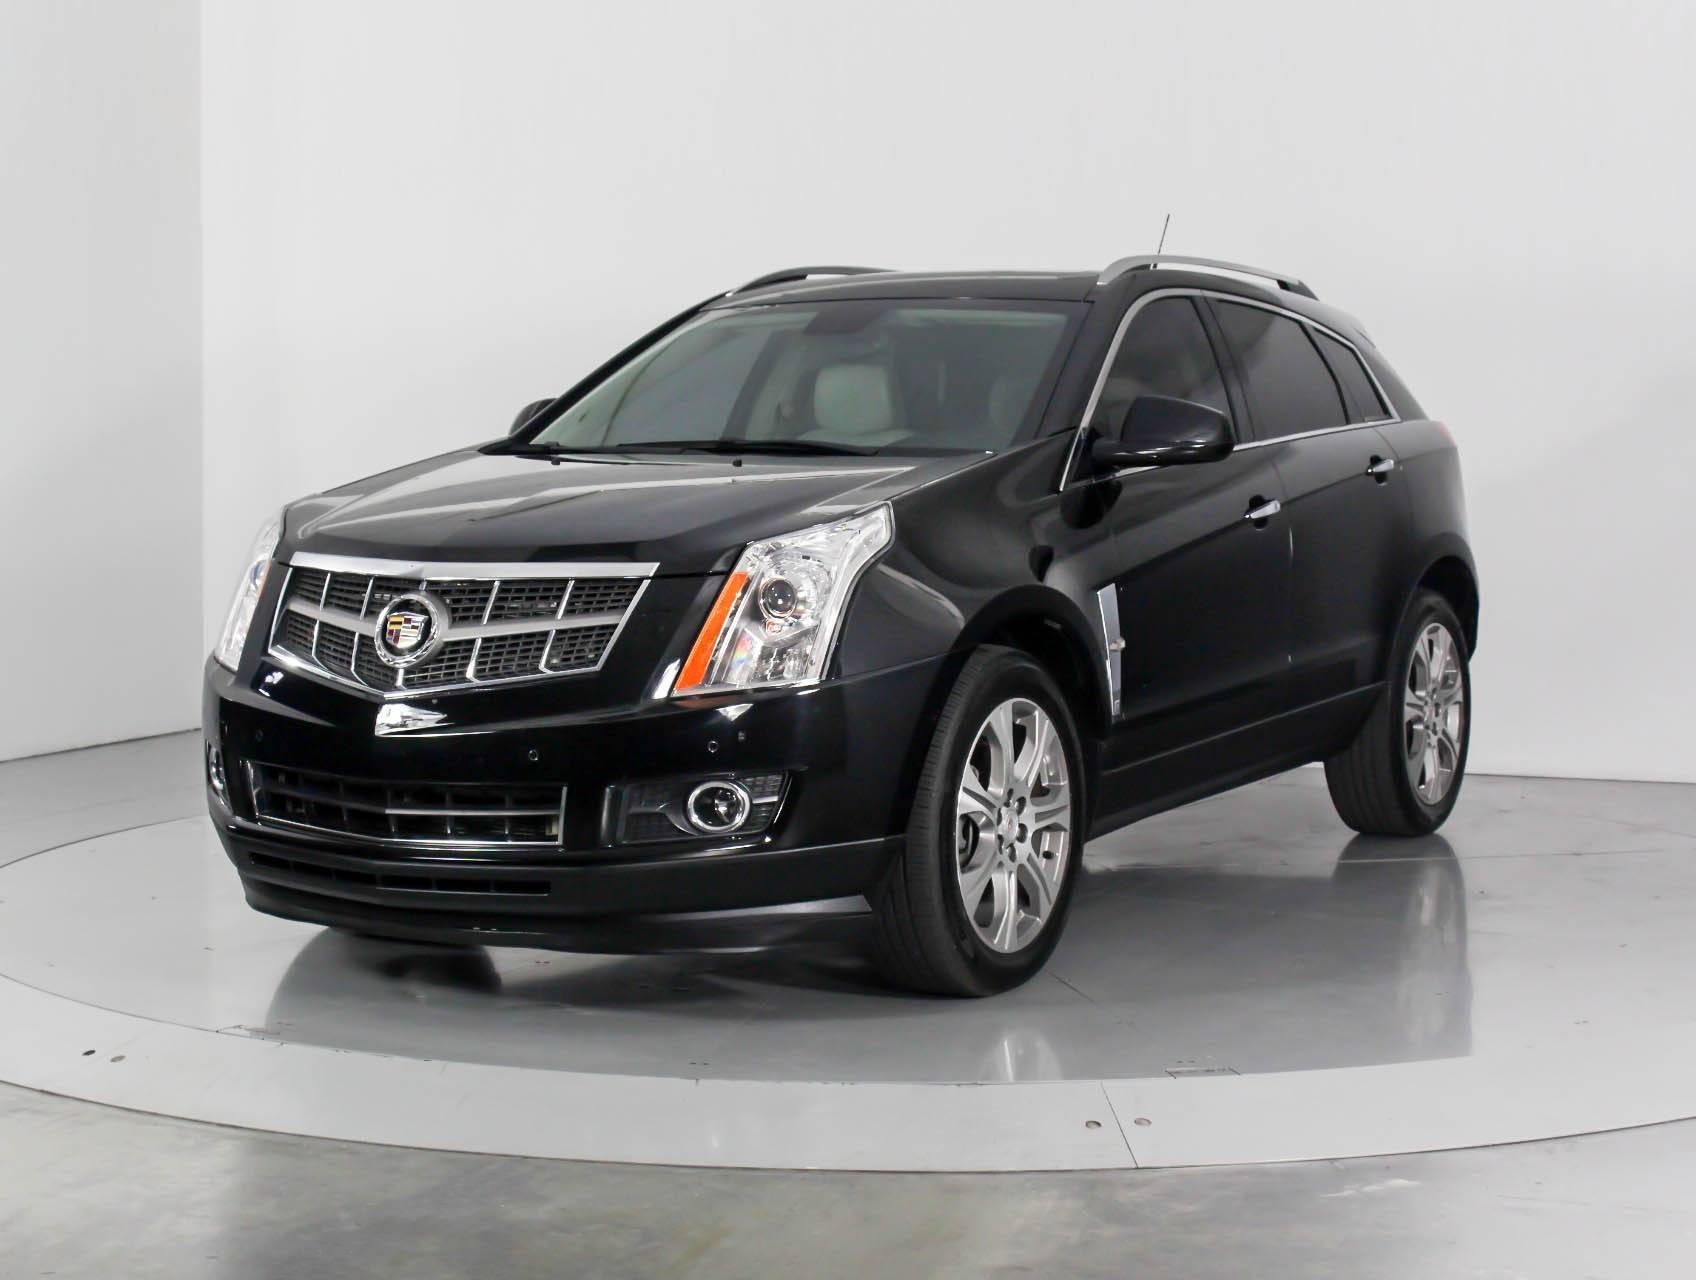 Used 2012 CADILLAC SRX PERFORMANCE for sale in WEST PALM | 100348